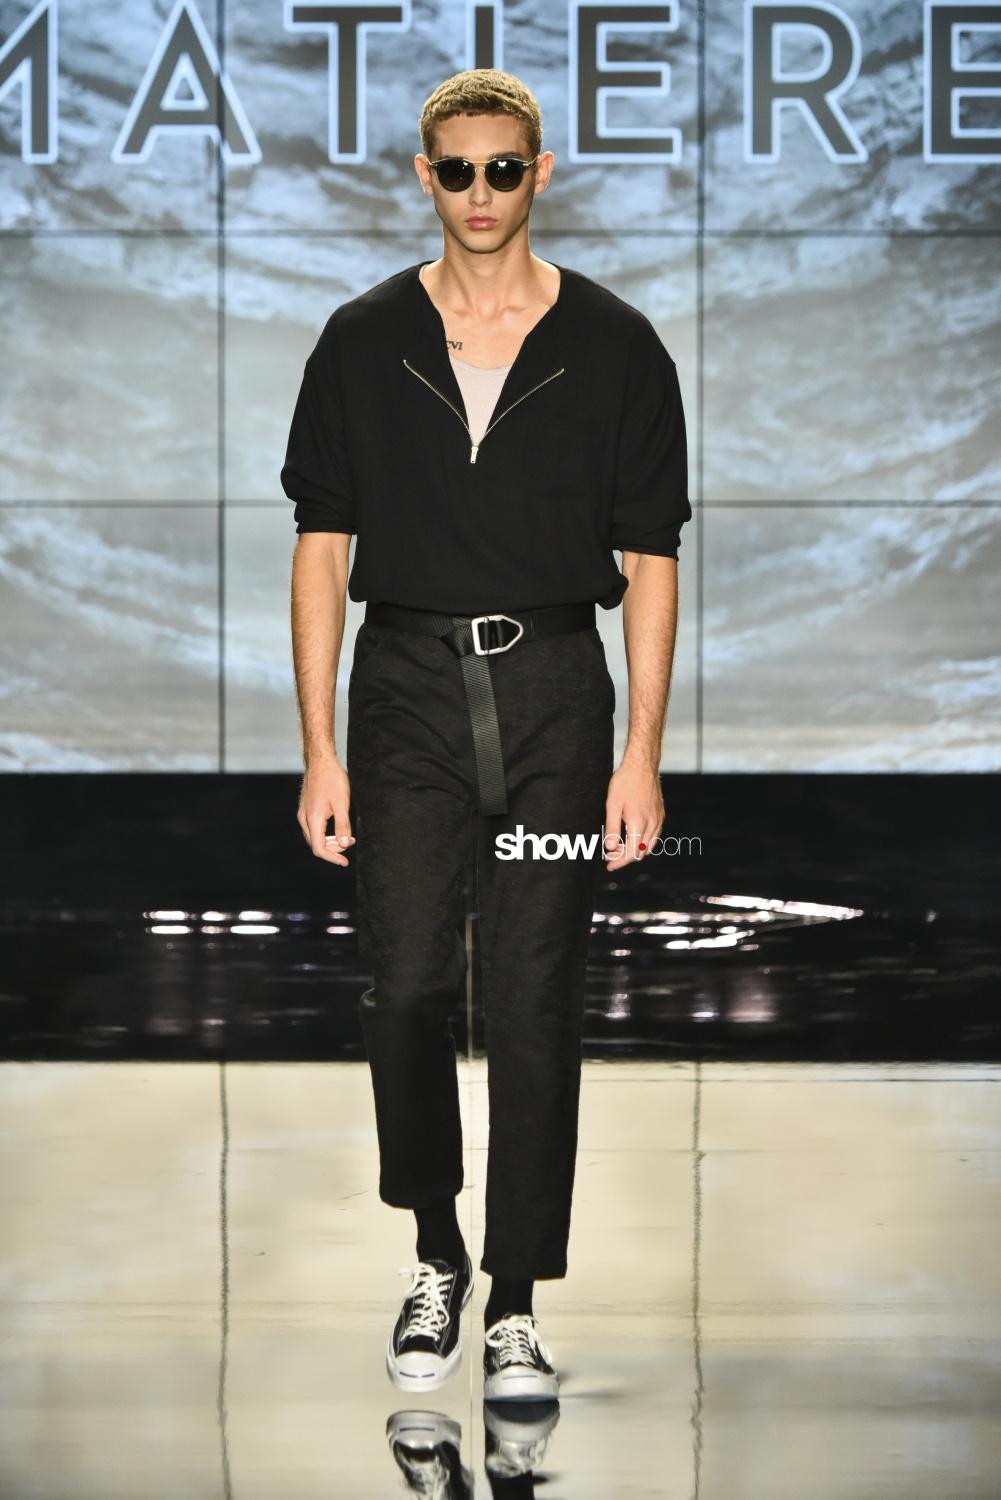 New York Men's Fashion Week: The Best Spring Summer 2018 Collections -  ShowBit